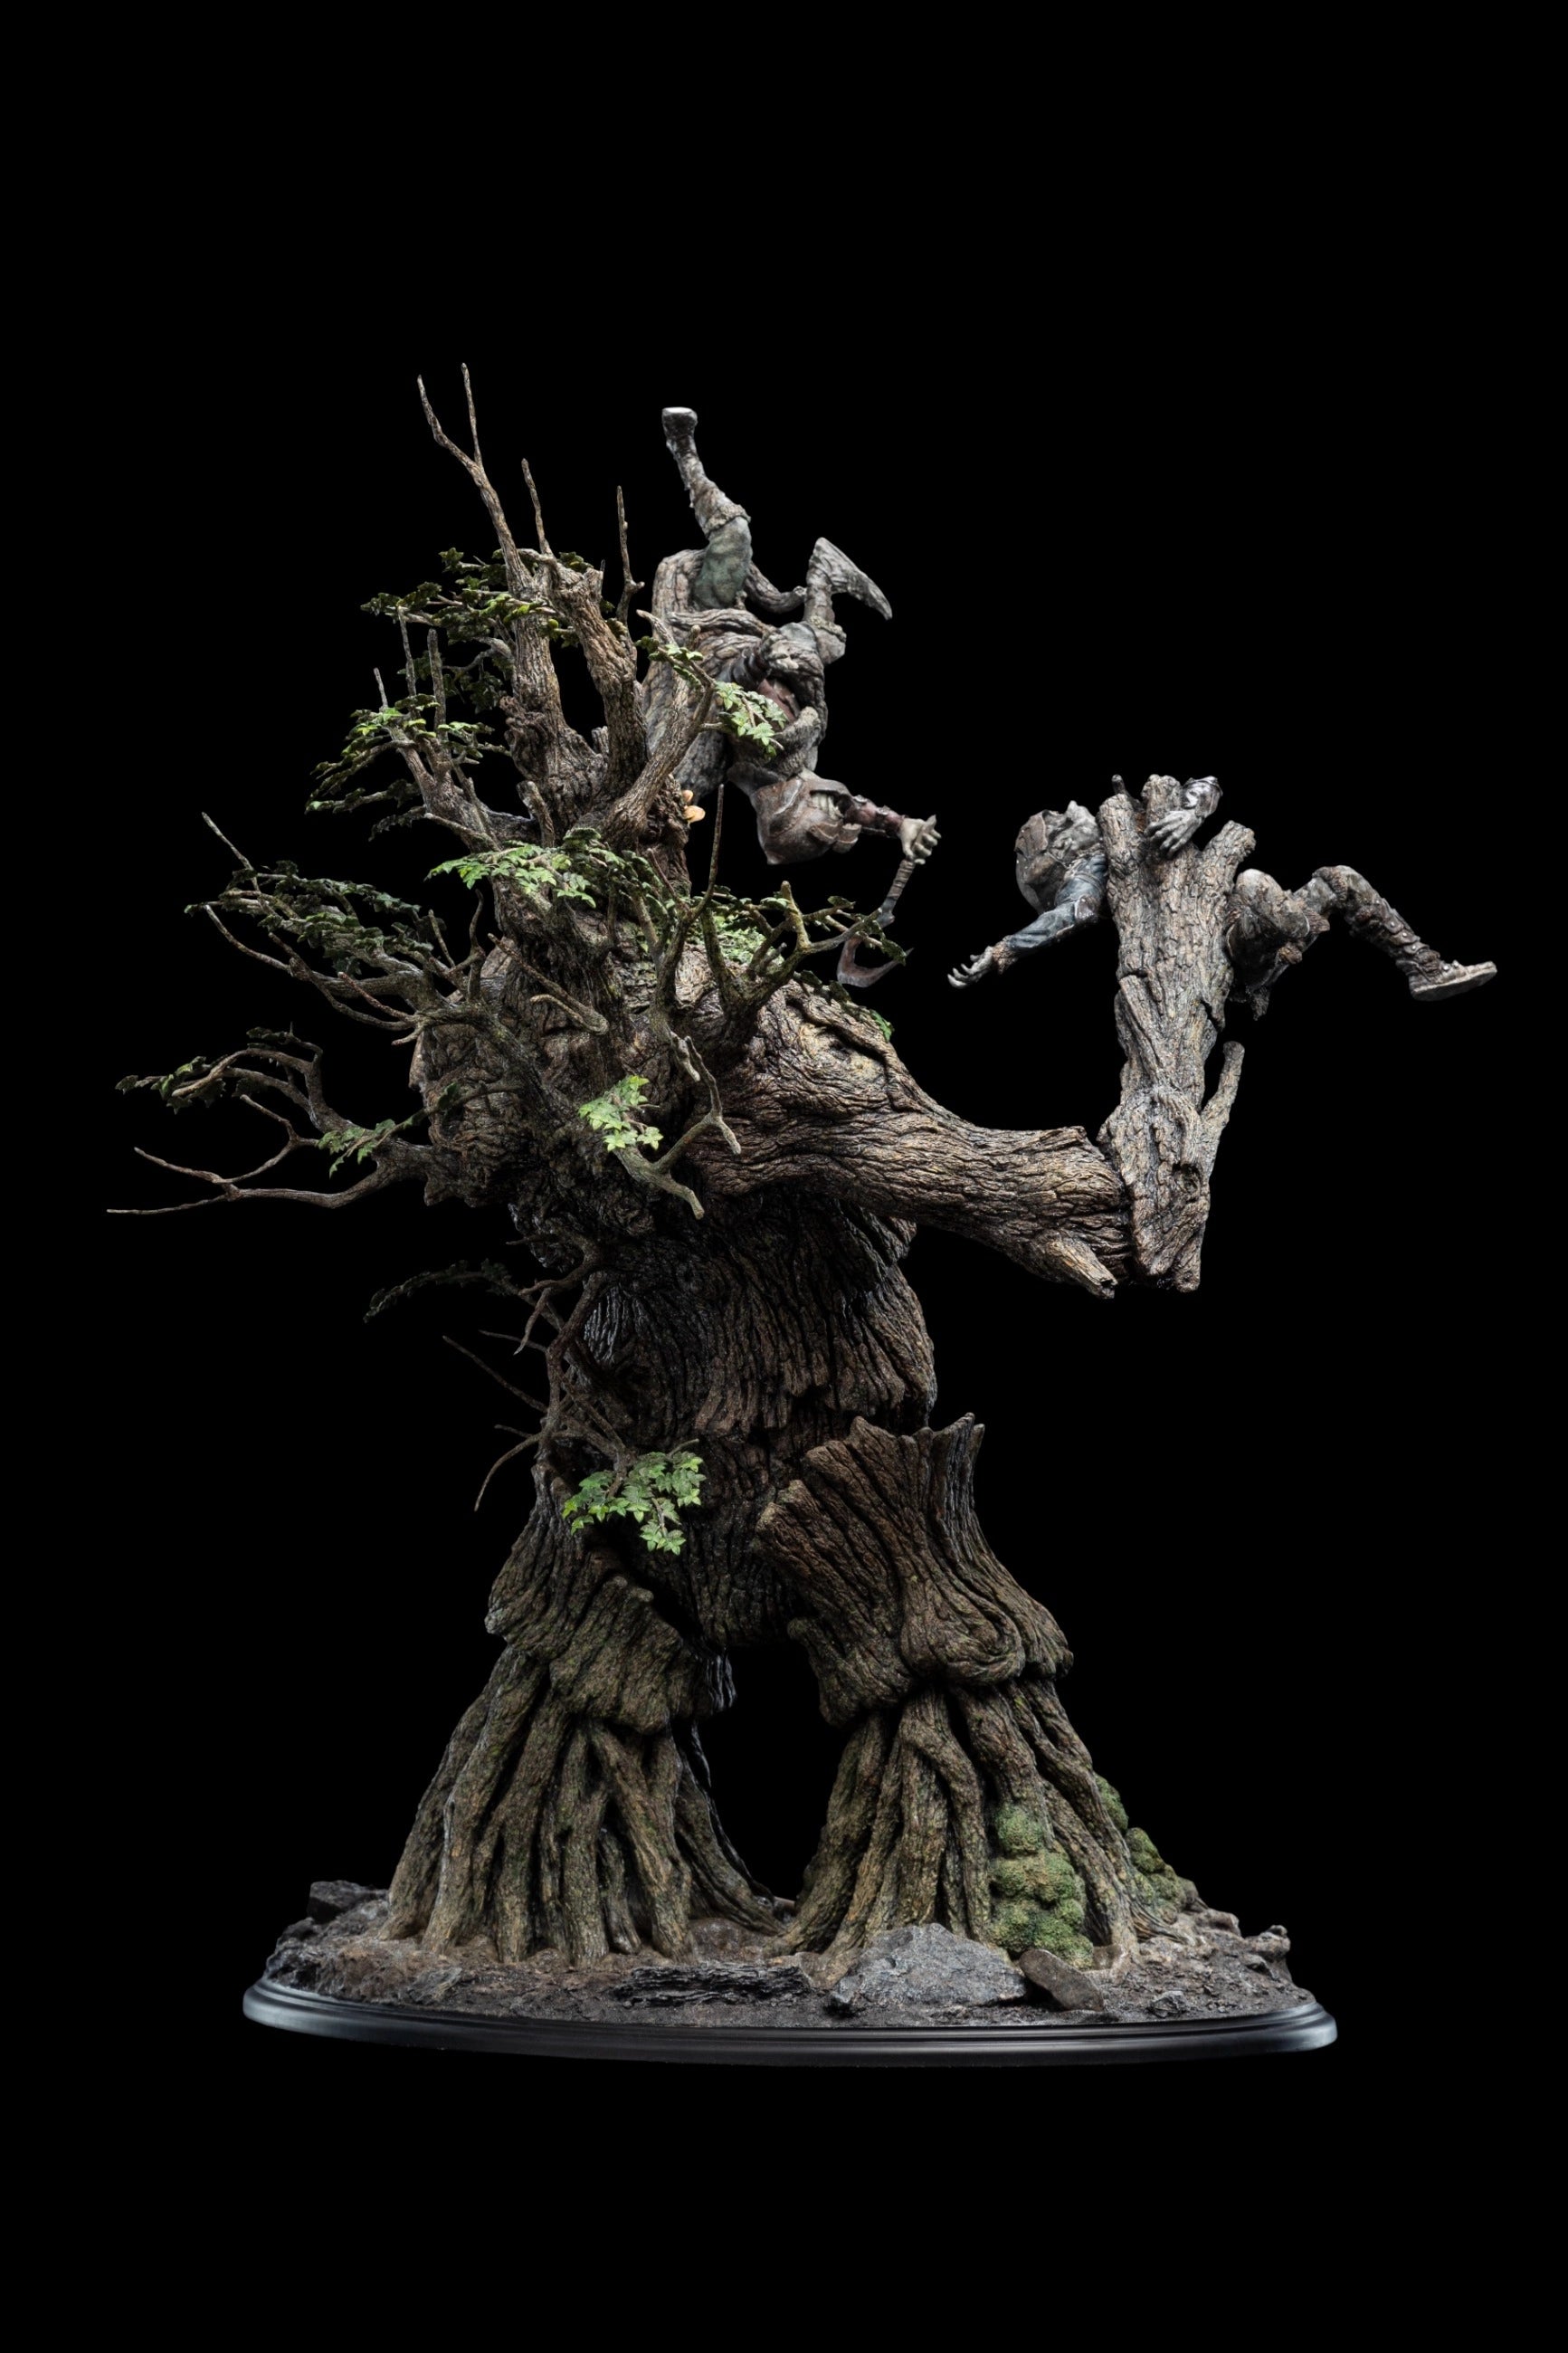 Leaflock the Ent - The Lord of the Rings Trilogy 1:6 Scale Limited Edition Polystone Statue